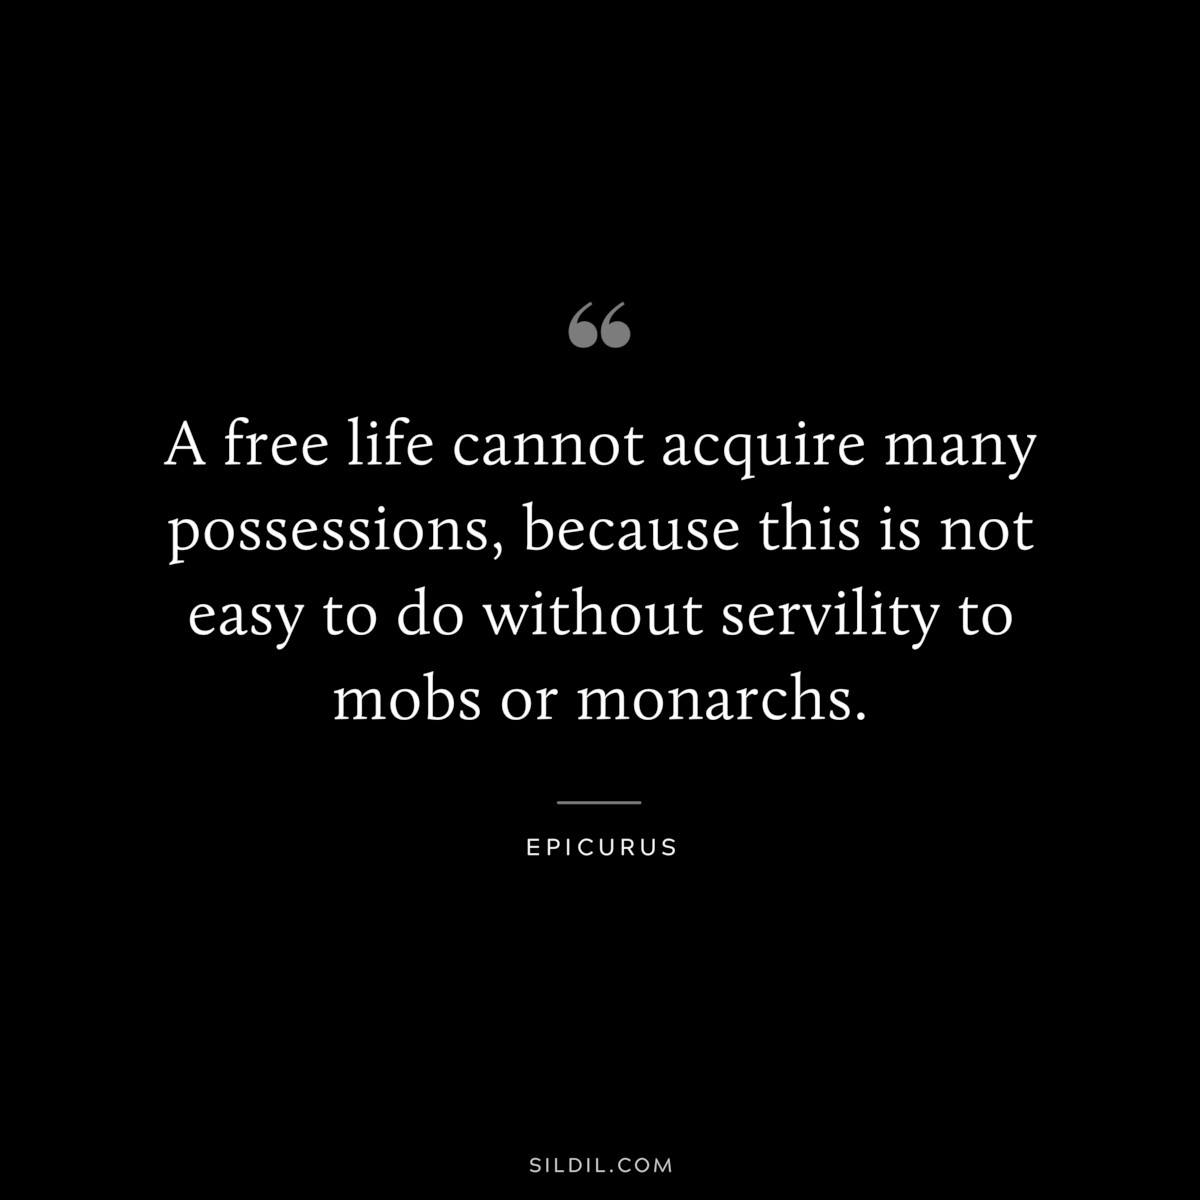 A free life cannot acquire many possessions, because this is not easy to do without servility to mobs or monarchs. — Epicurus